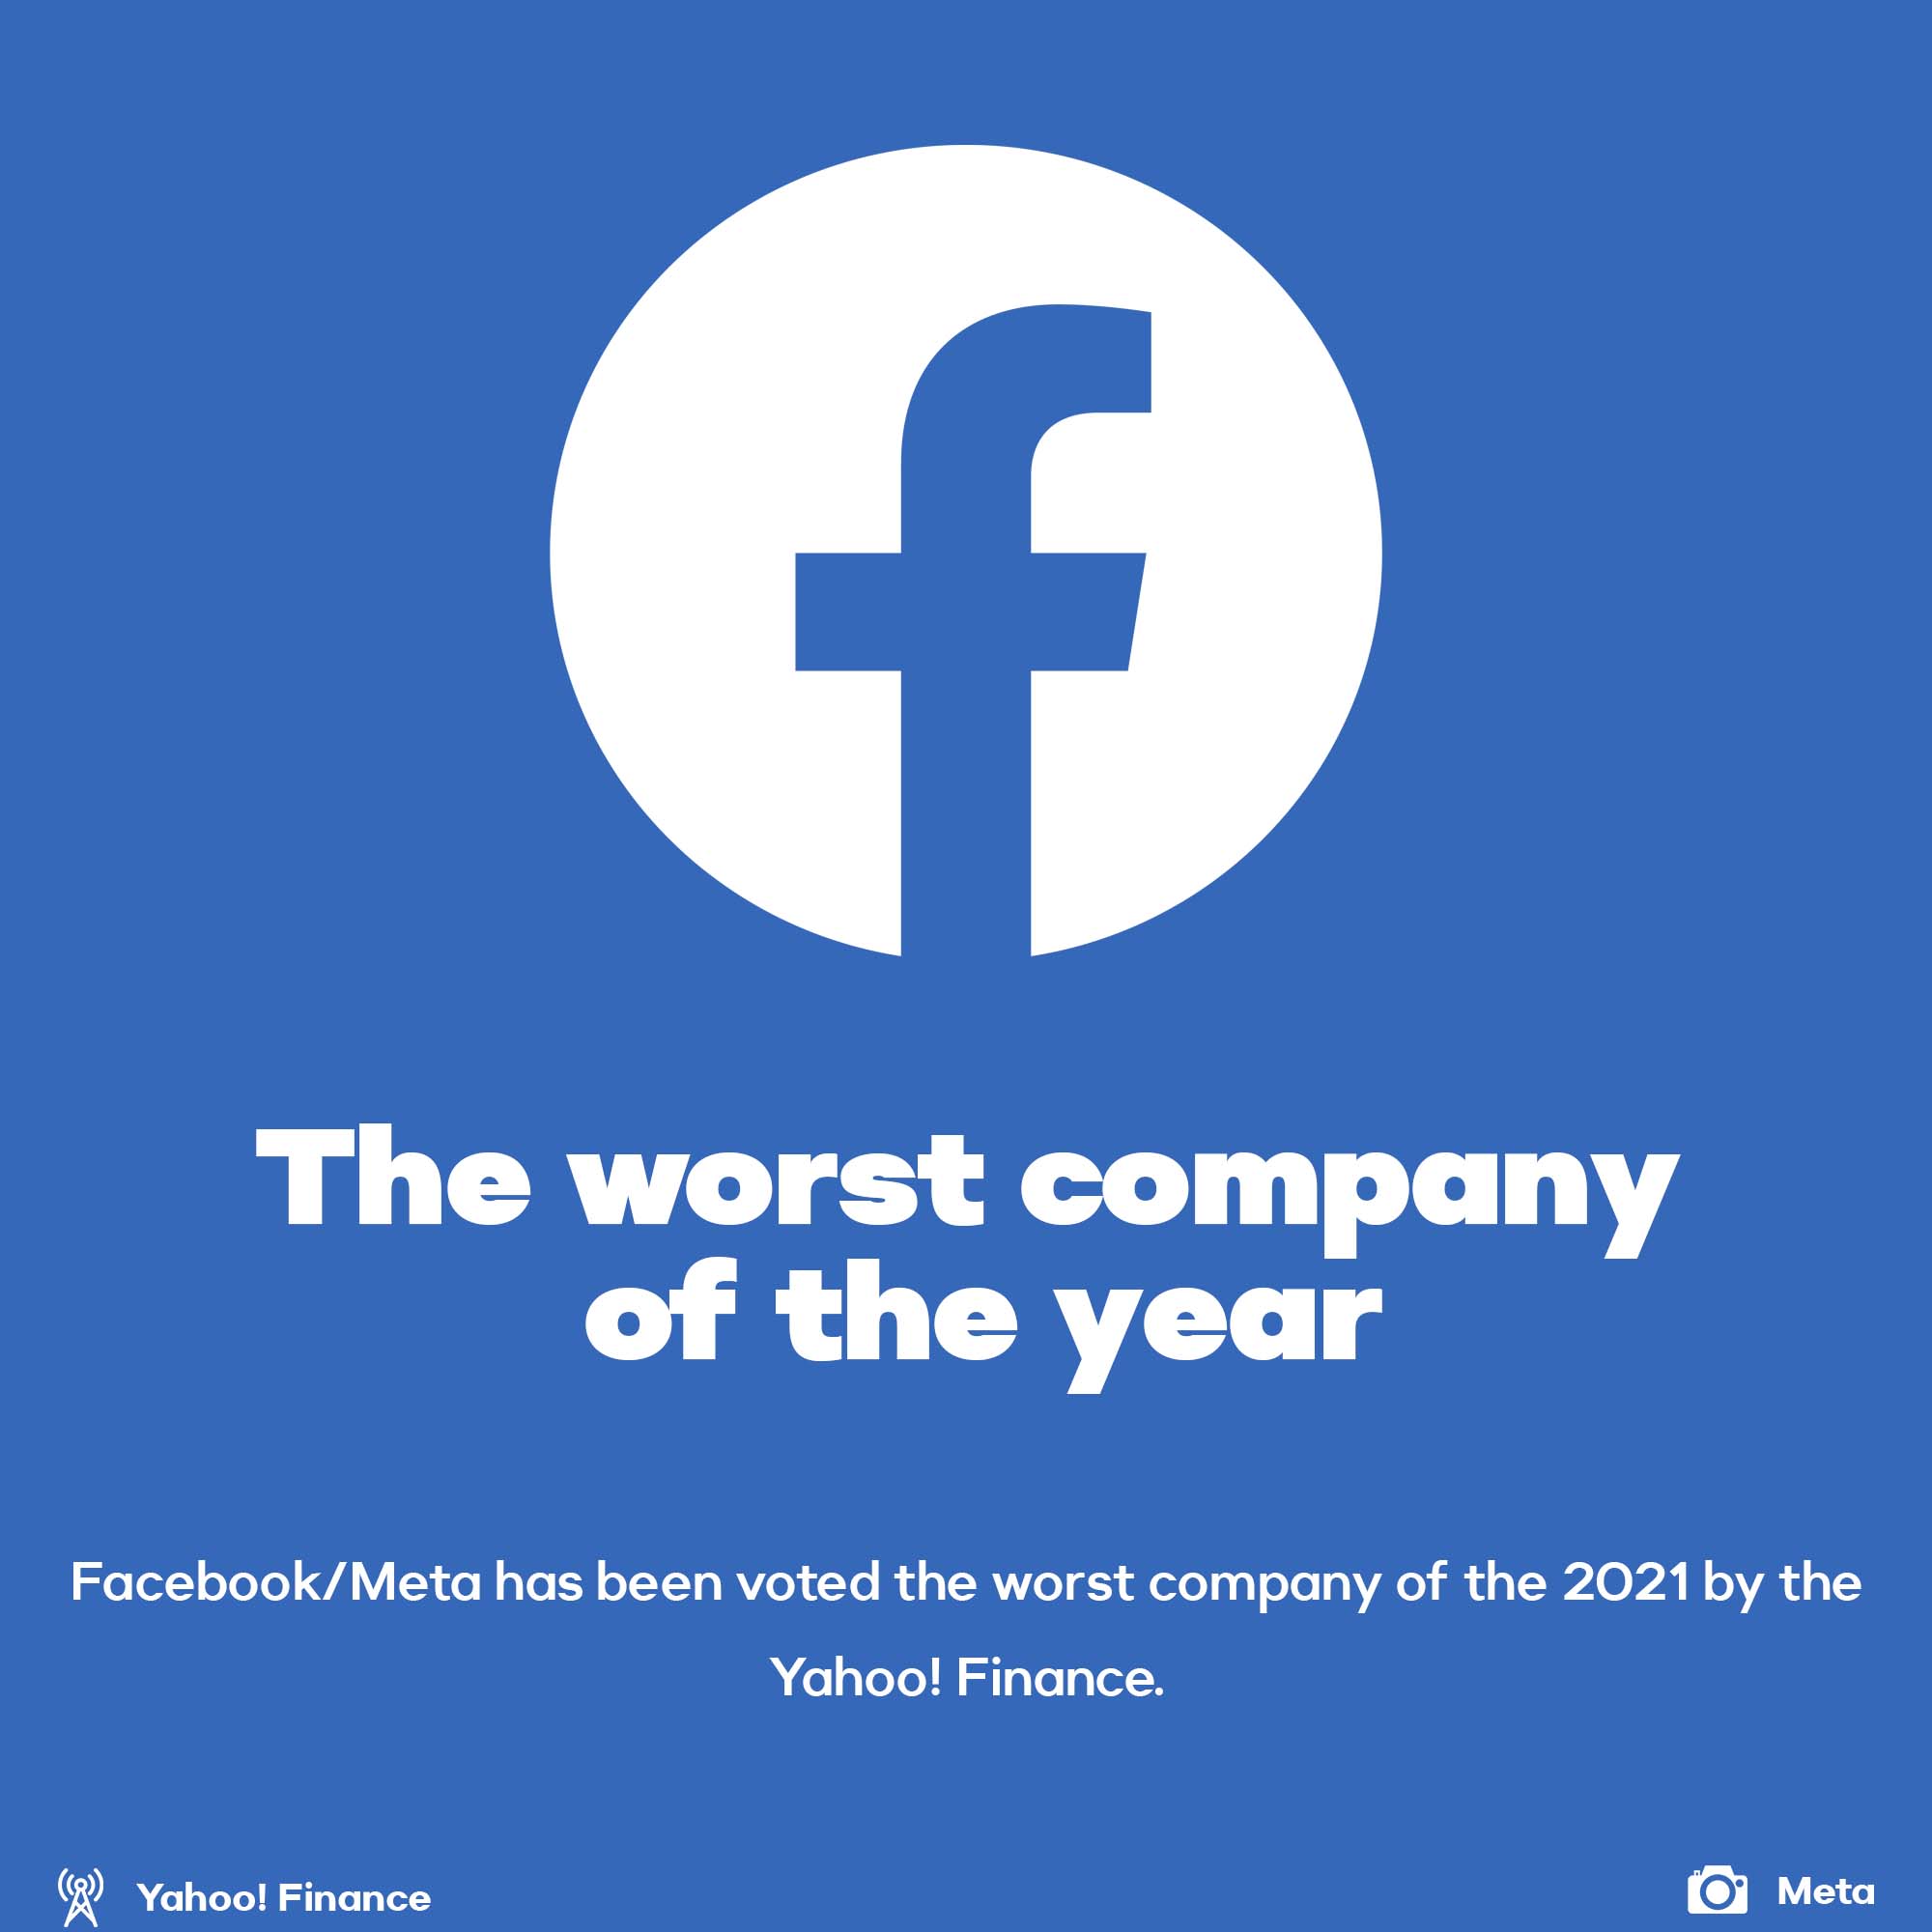 Facebook/Meta has been voted the worst company of the 2021 by Yahoo! Finance